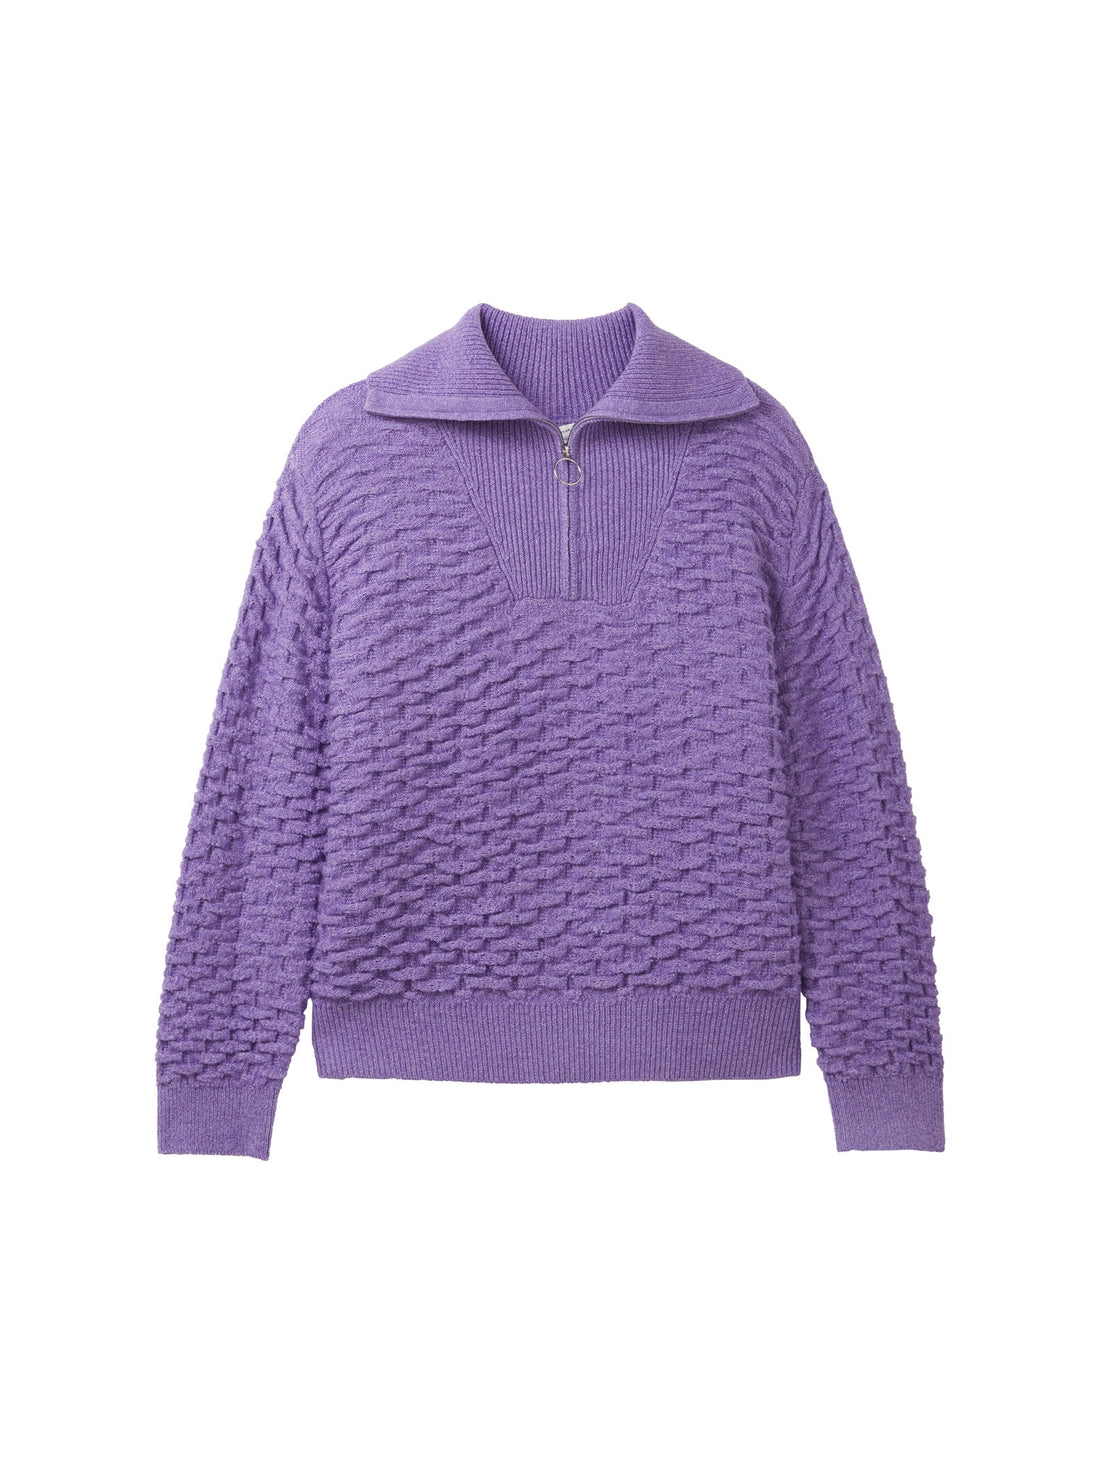 Knitted Sweater With Quarter Zip_1038155_32255_01